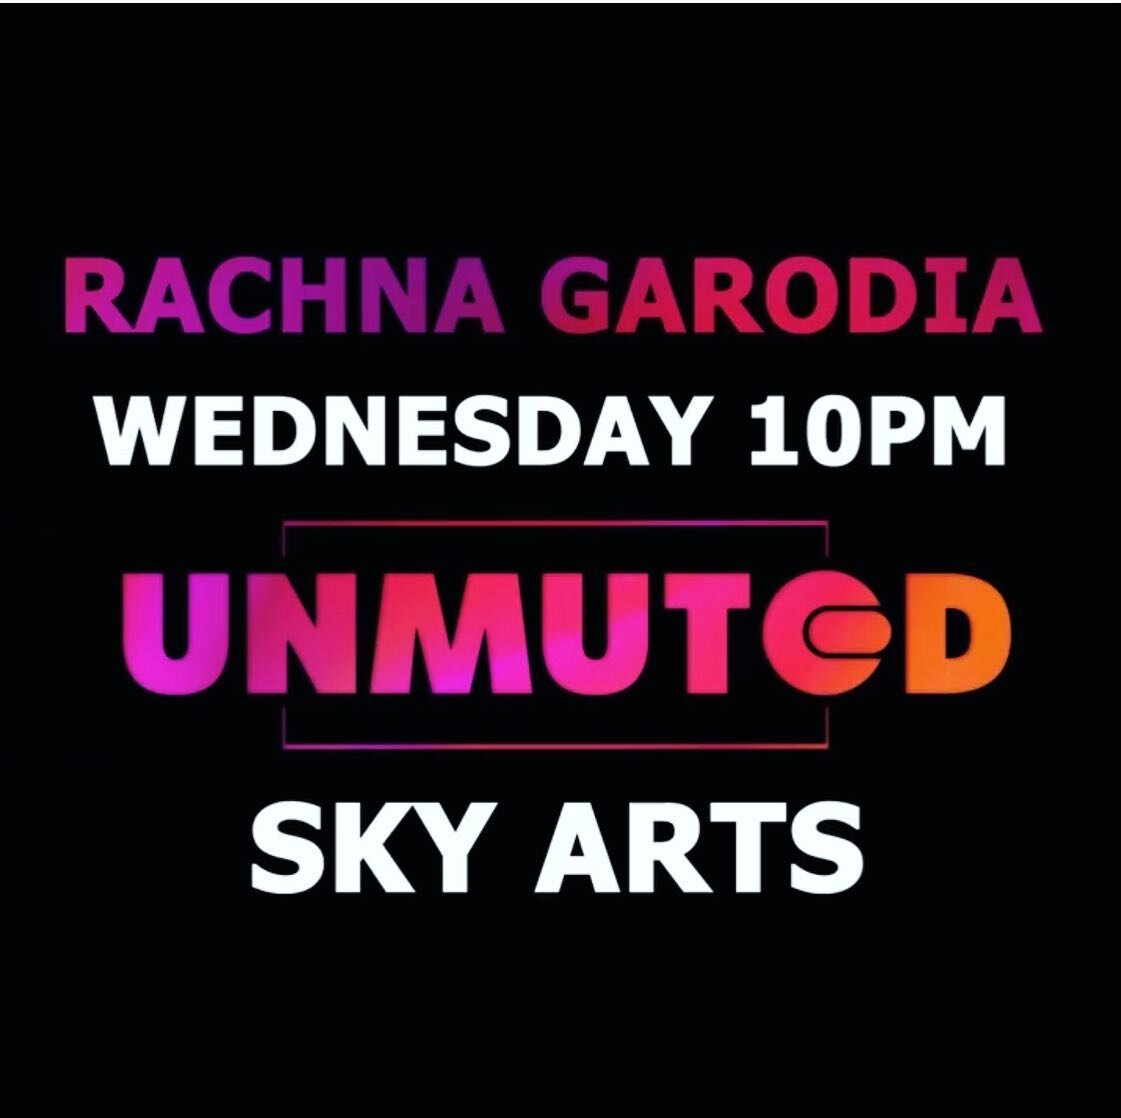 This Wednesday I&rsquo;m on @skyarts in their second season of #unmuted by @licklemorproductions 
I will be talking to Aaron and Remel about my work! Stay tuned!!

Wednesday, 14th July 10pm
.
.
.
#unmuted #skyarts #sustainableart #textileart #naturea